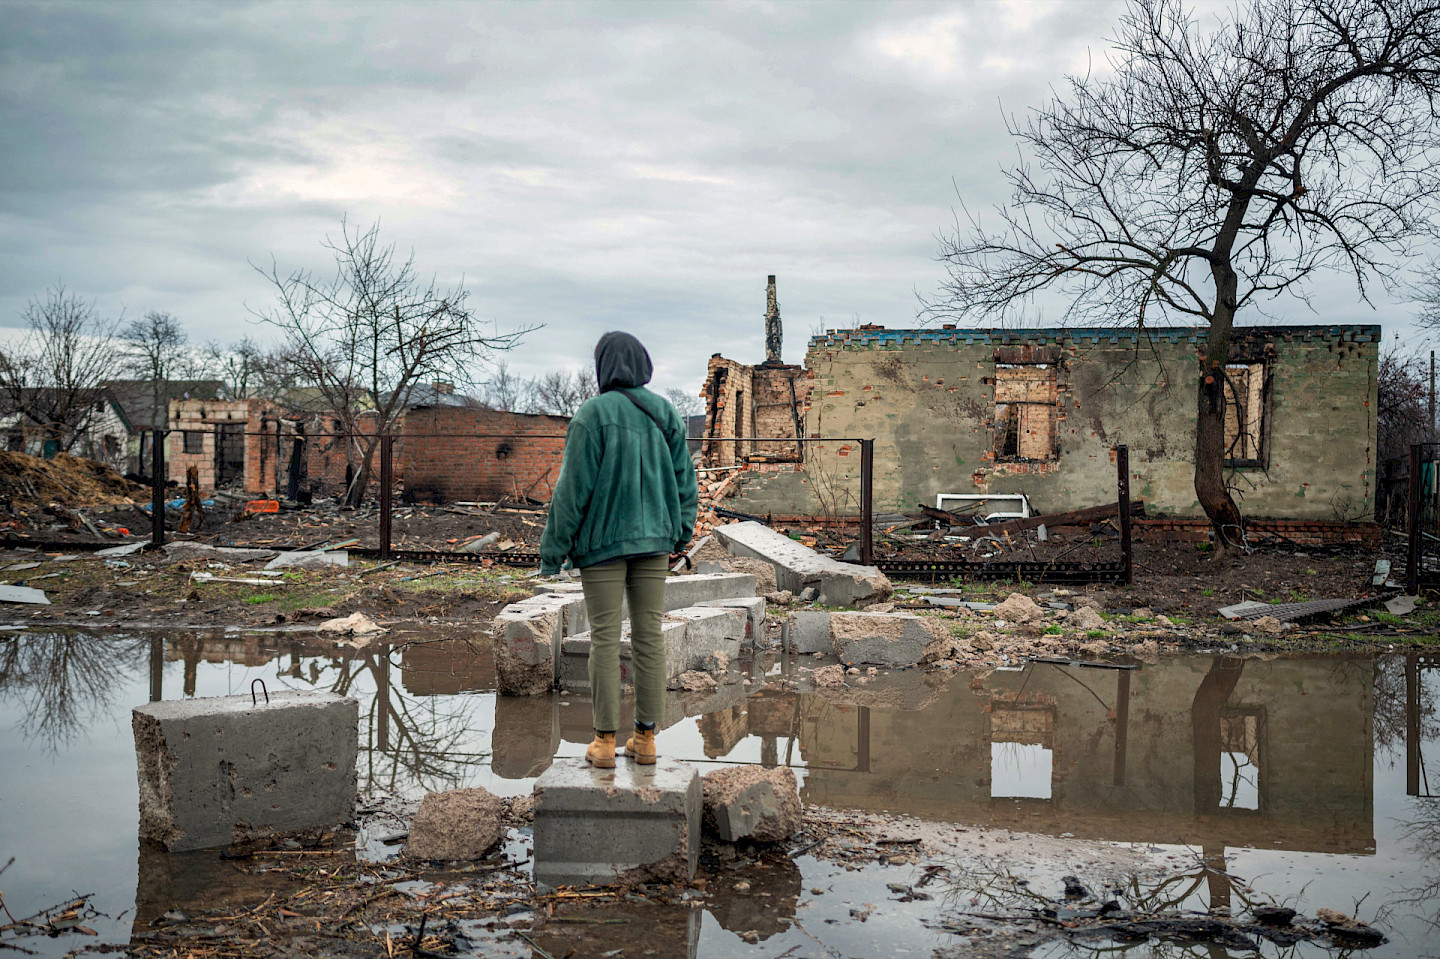 Destruction of civilian residential areas is part of the Russian military strategy after the attempt of complete occupation of Ukraine. A young woman looks at a destroyed settlement after the recapture of the city of Chernihiv in northeastern Ukraine.